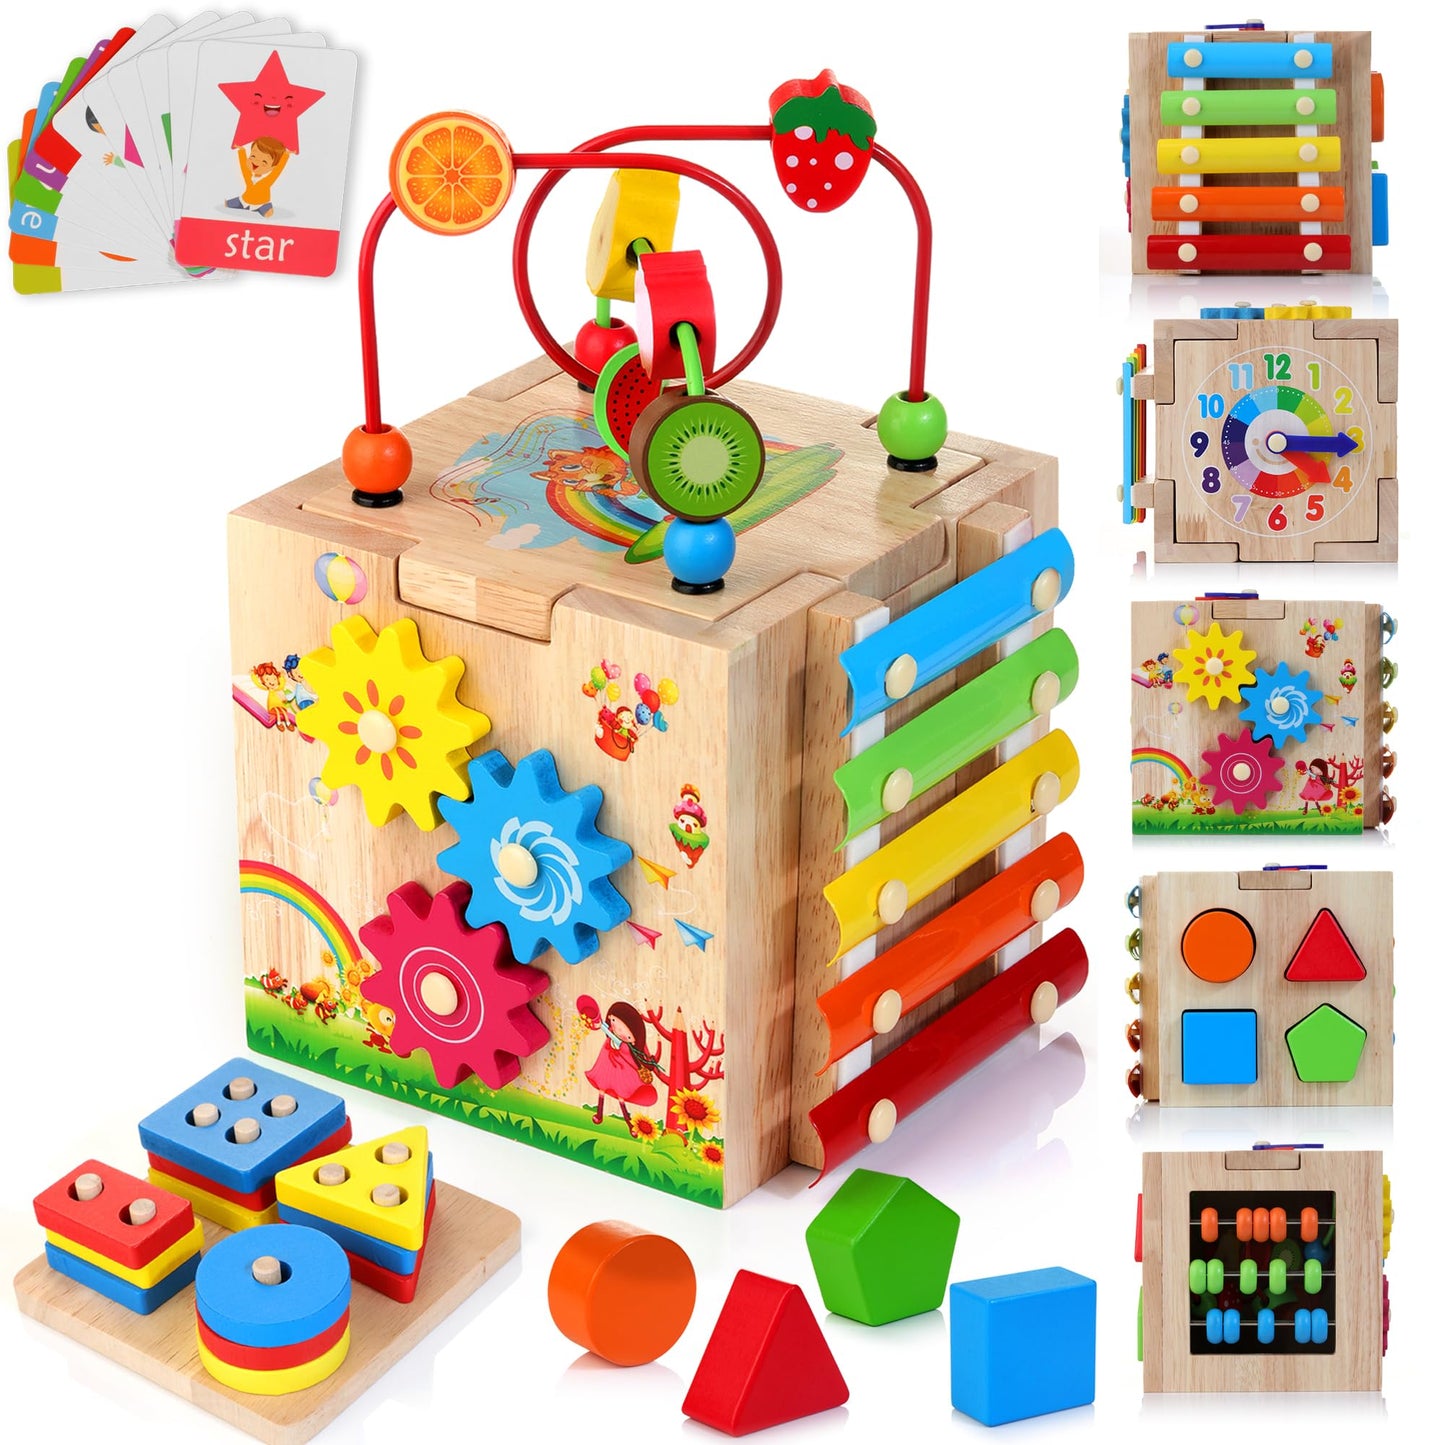 HELLOWOOD Wooden Activity Cube, 8-in-1 Montessori Toys for 1+ Year Old Boys & Girls, Educational Learning Toys for Toddlers Age 1-2, First Birthday